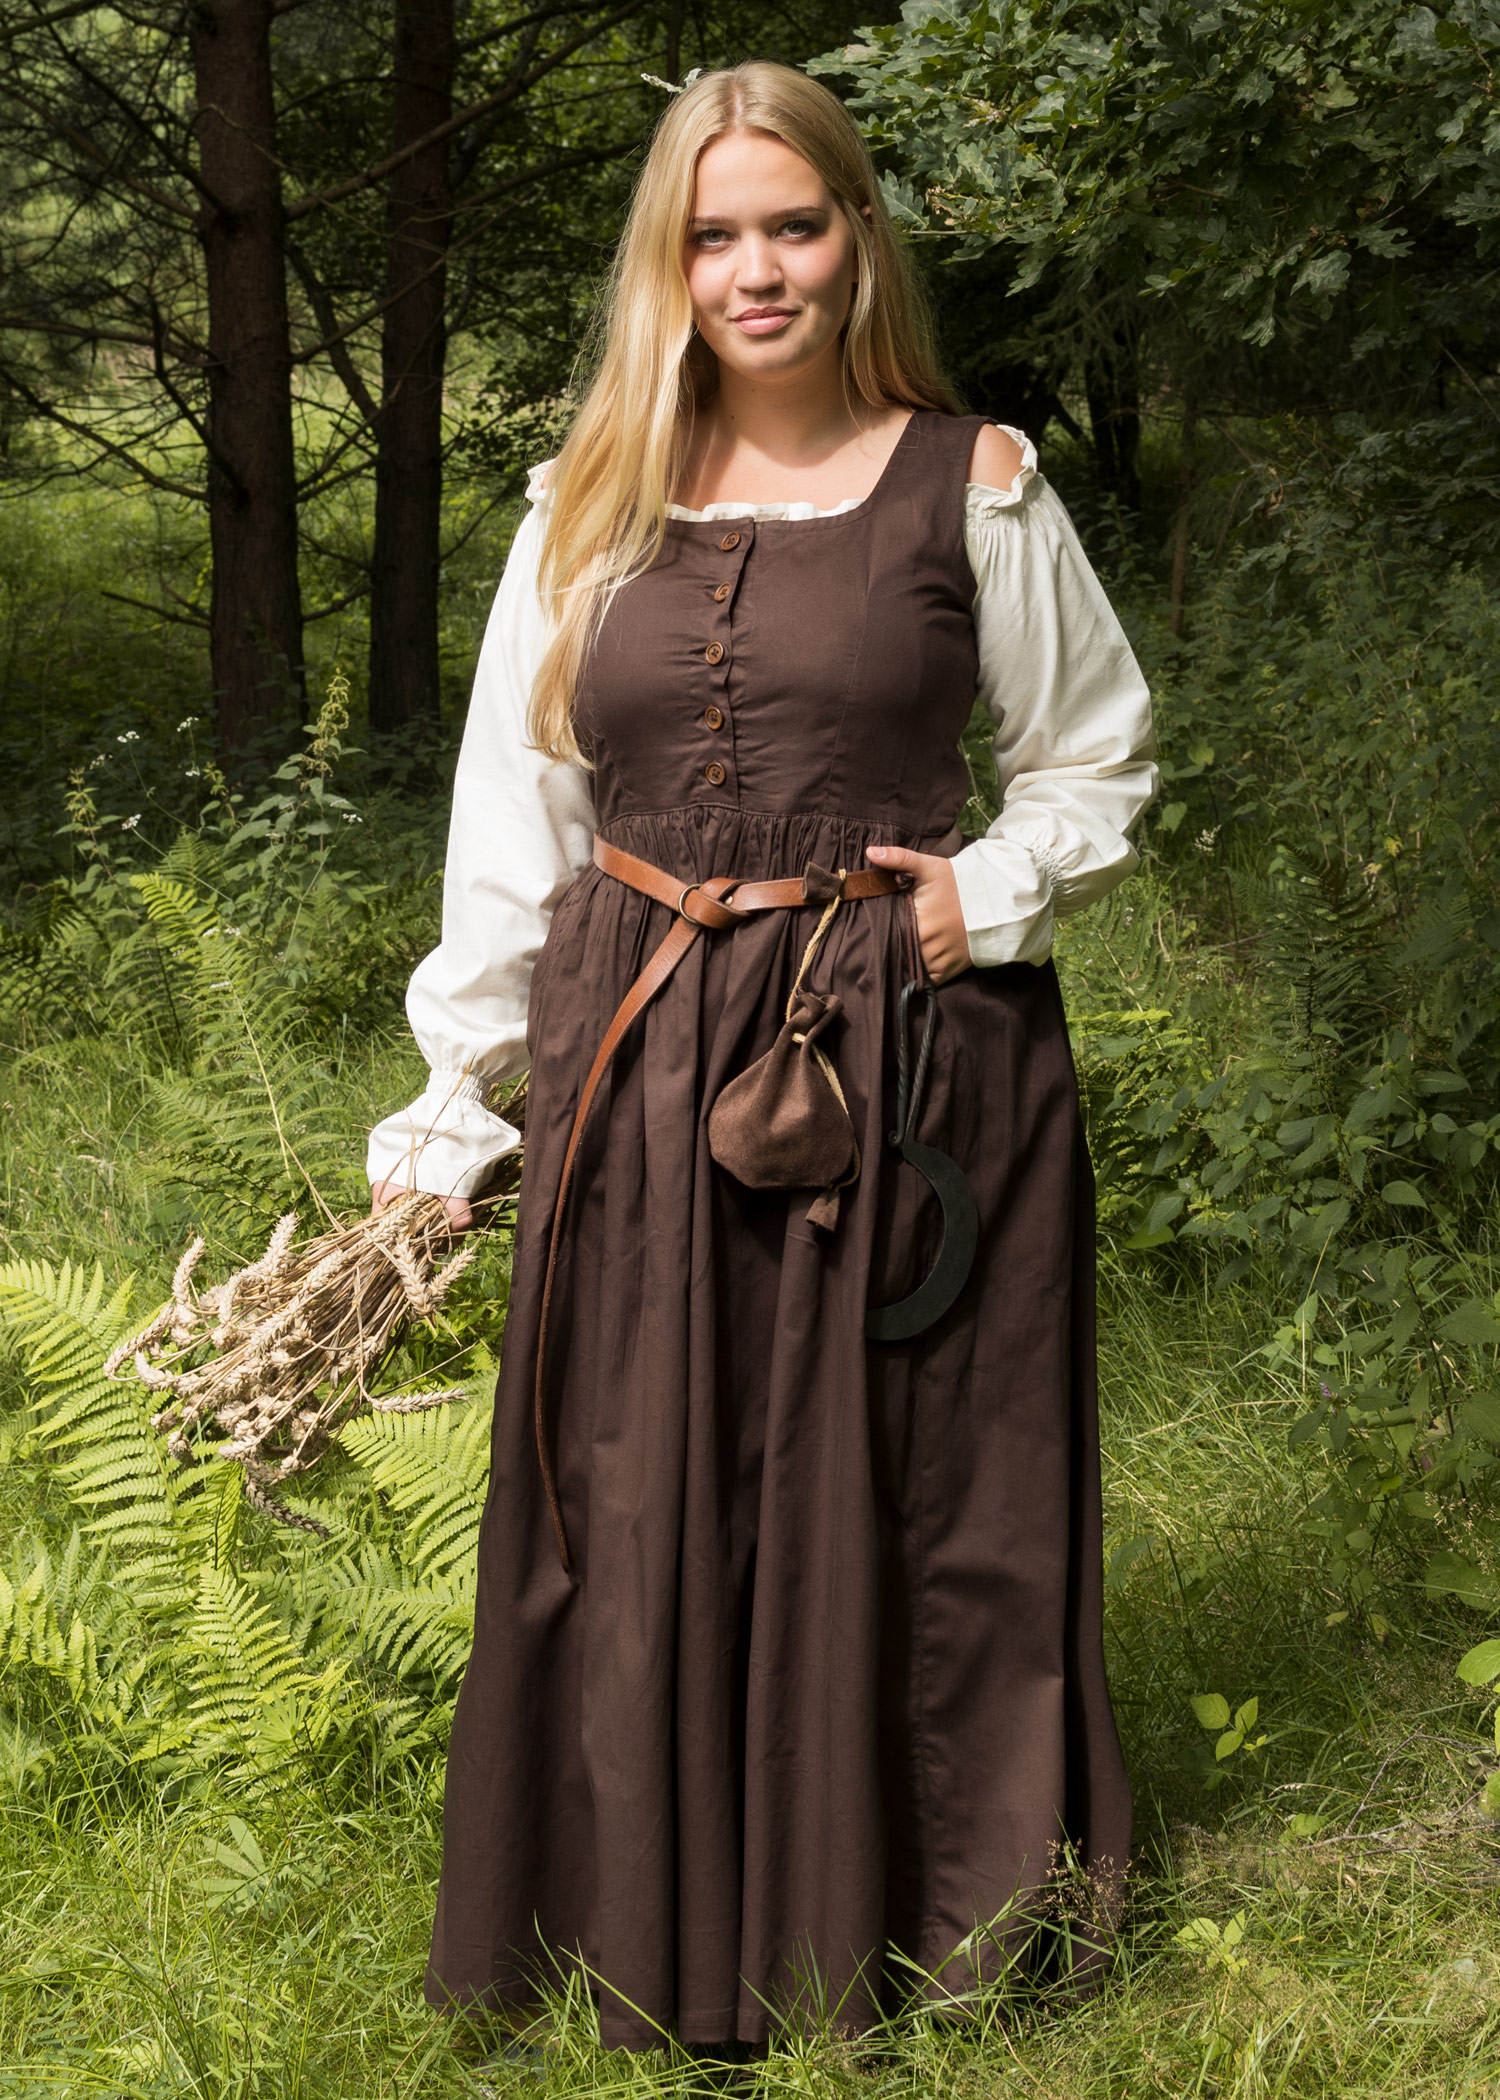 Sleeveless Medieval Dress, Overdress Lene, brown, Peasant's Dress, Dresses, Middle  Ages, Garments, Clothing